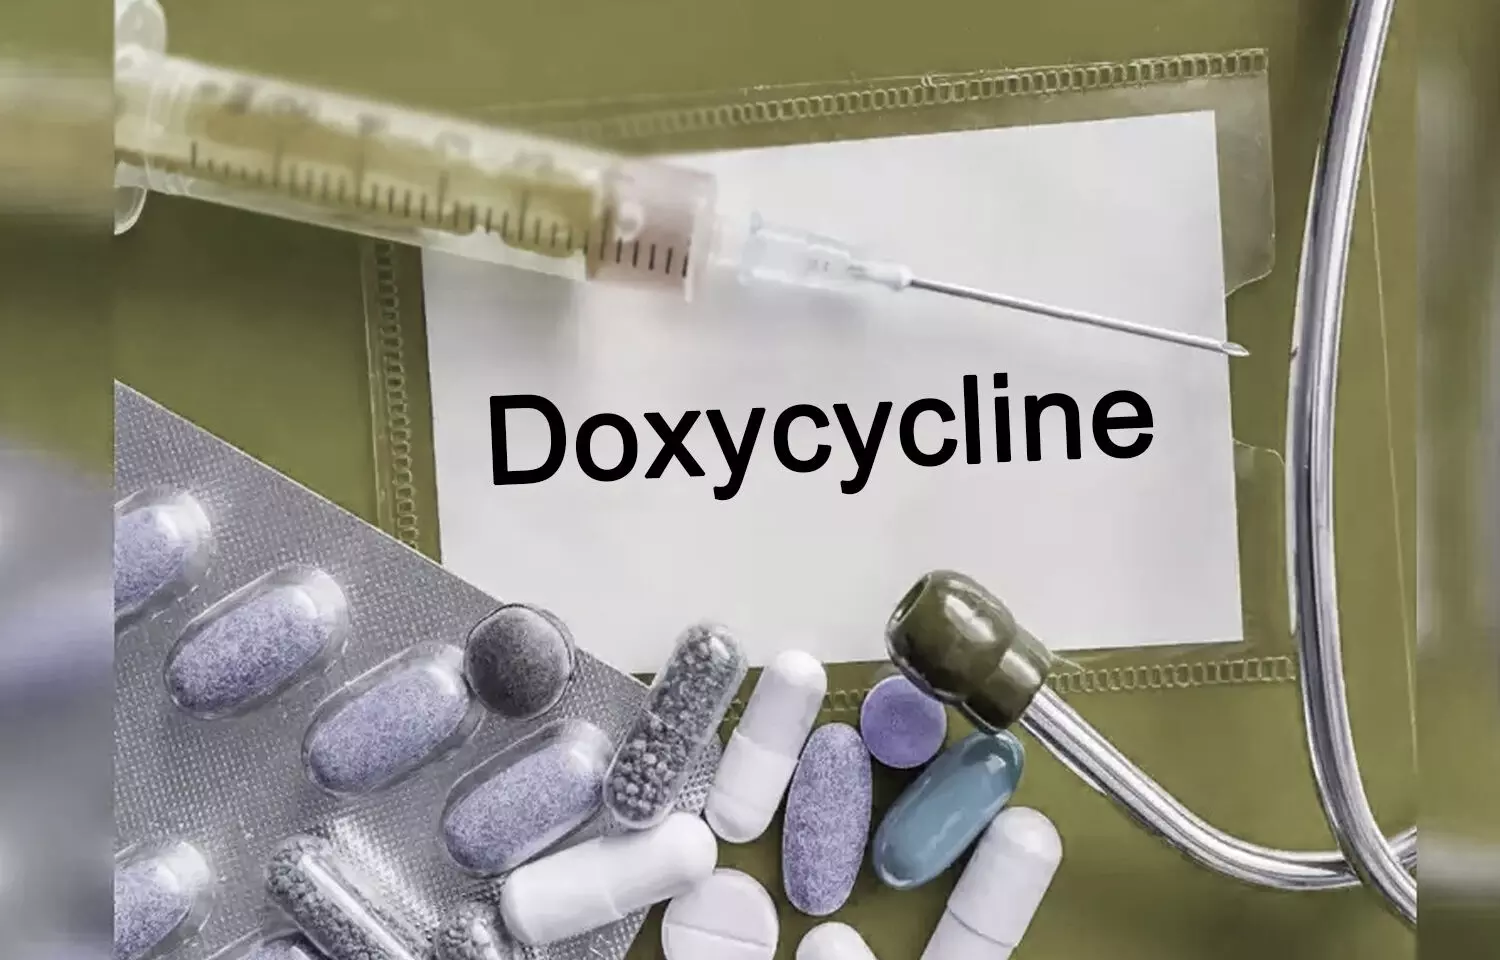 Doxycycline: The Secret Weapon of the physician